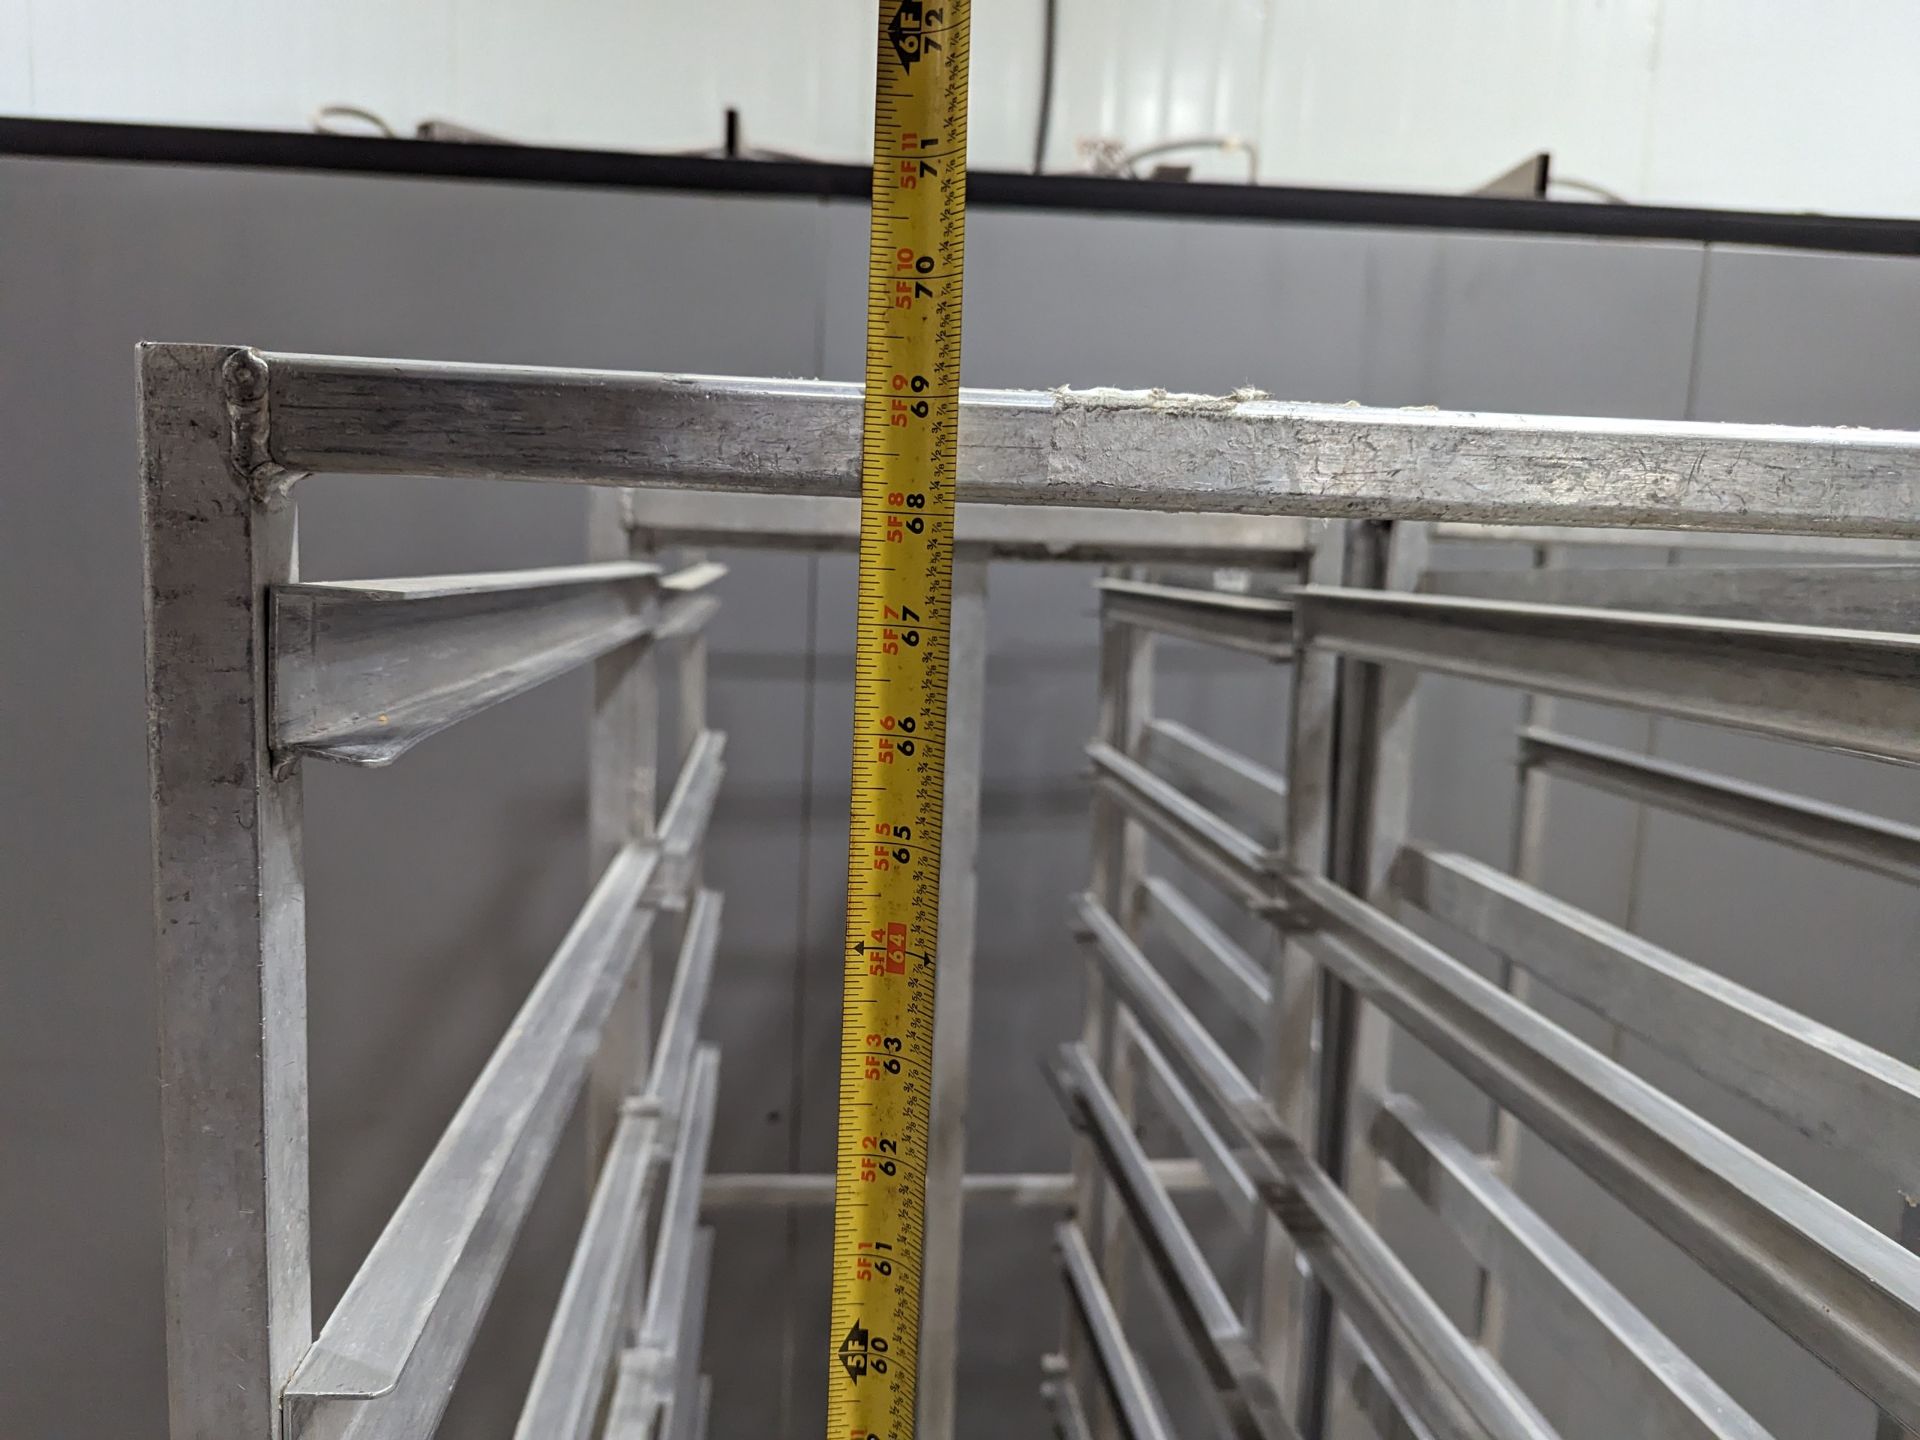 Lot of 4 Single Wide Aluminum Bakery Racks, Dimensions LxWxH: 57x37.5x69 Measurements are for lot - Image 6 of 7